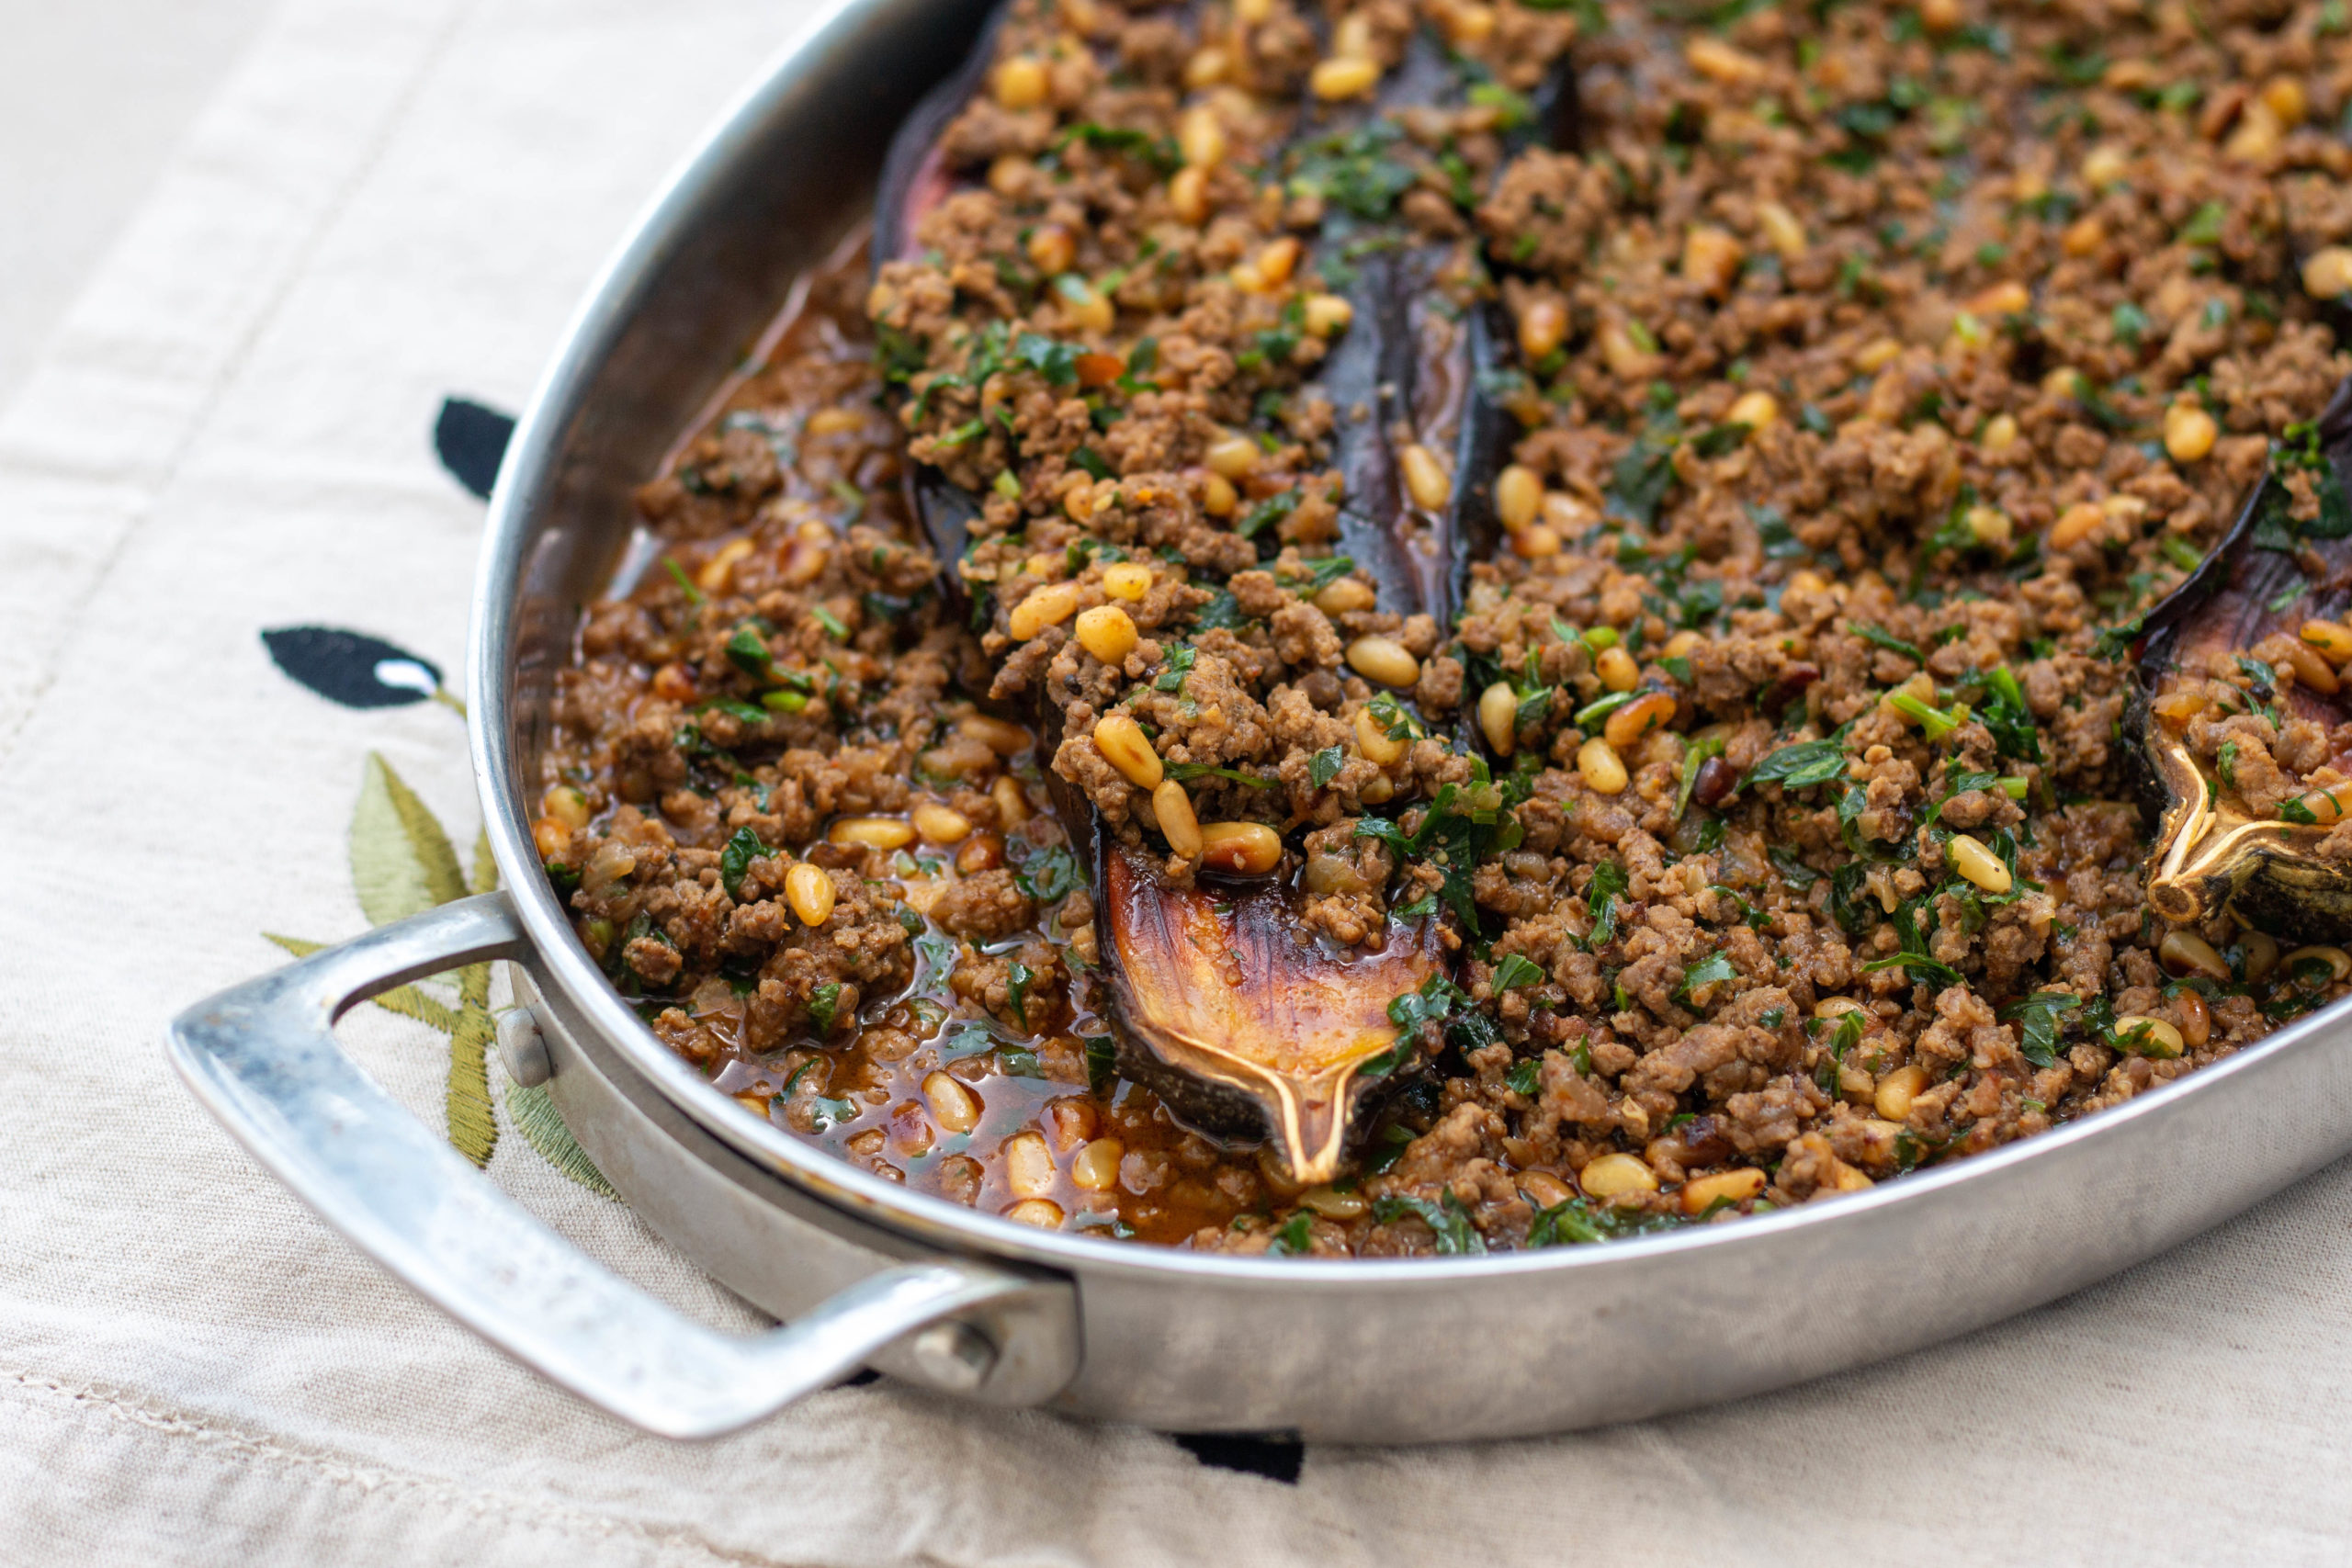 Oval casserole dish with eggplant, ground meat, pine nuts and herbs on a white tablecloth